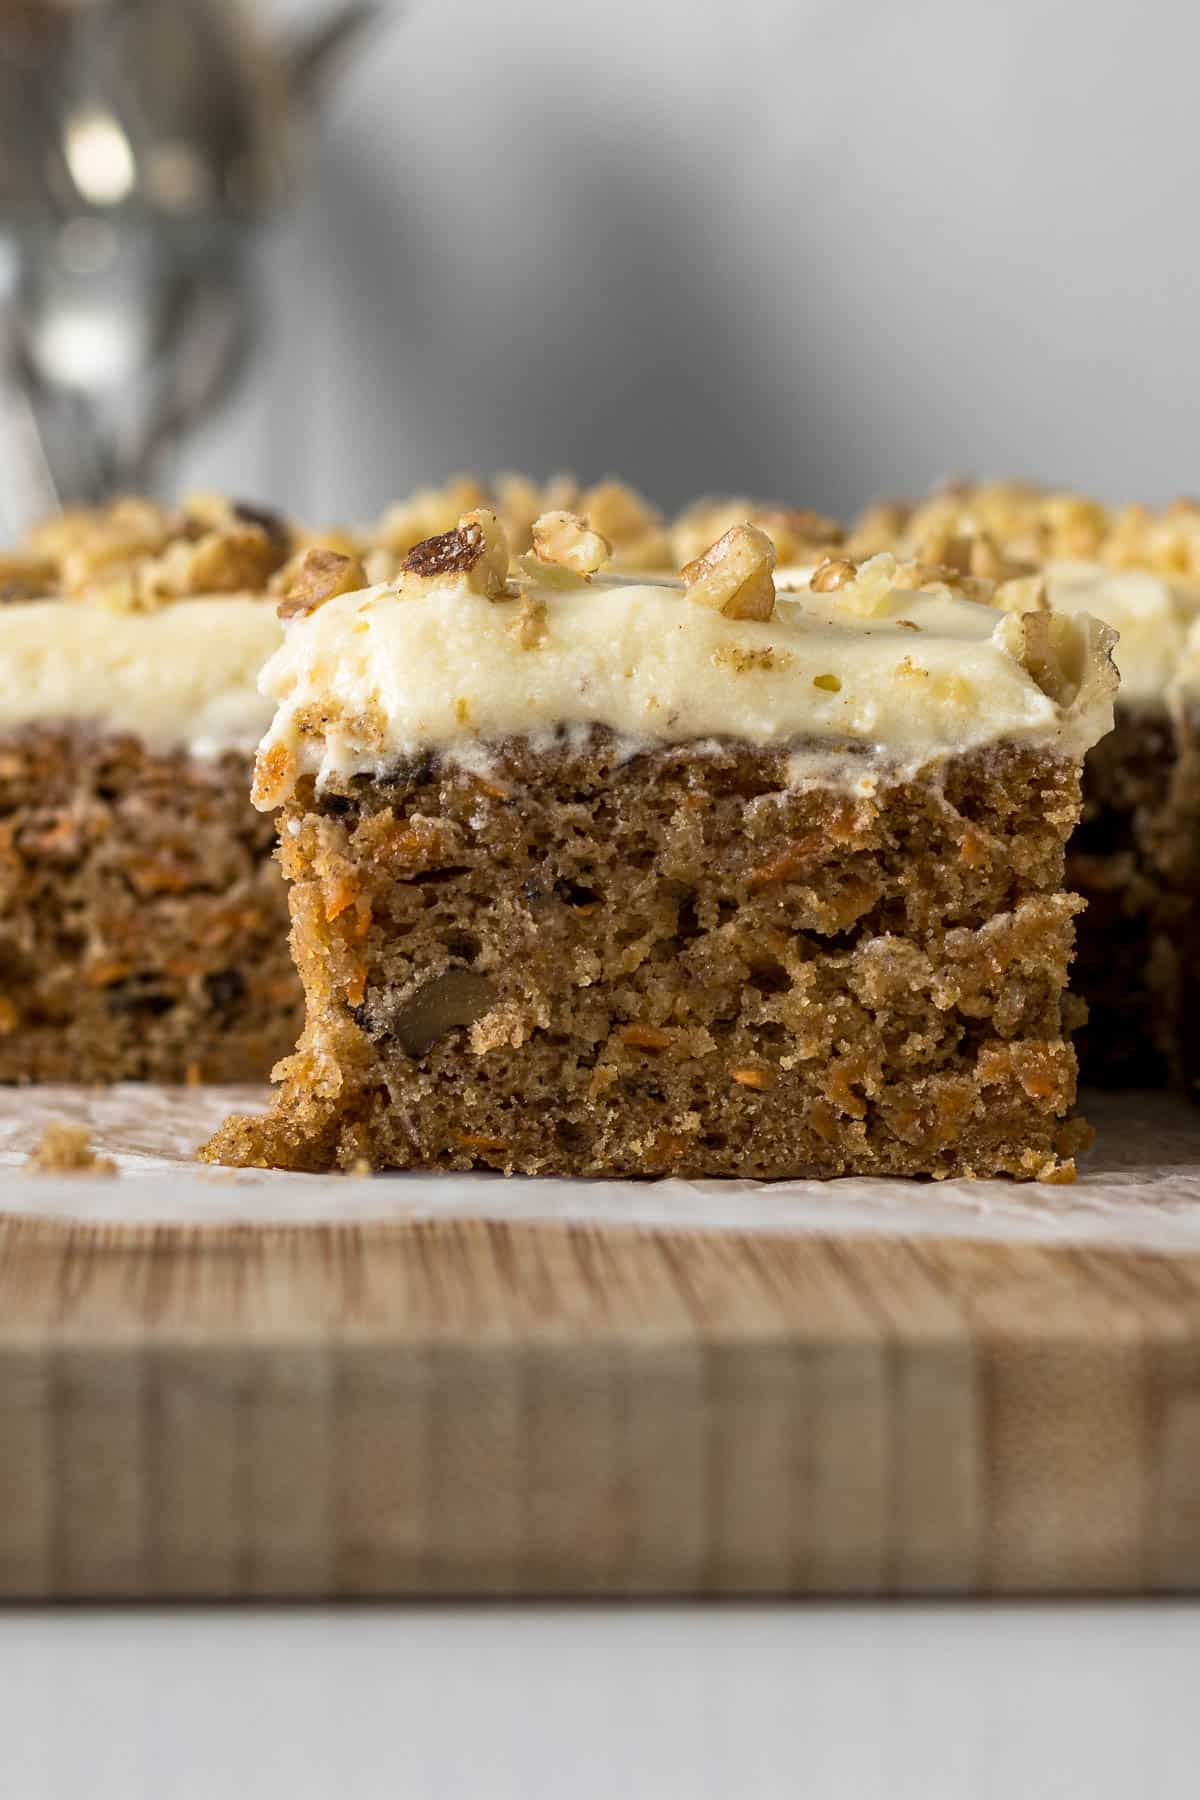 Sliced carrot cake with cream cheese frosting.